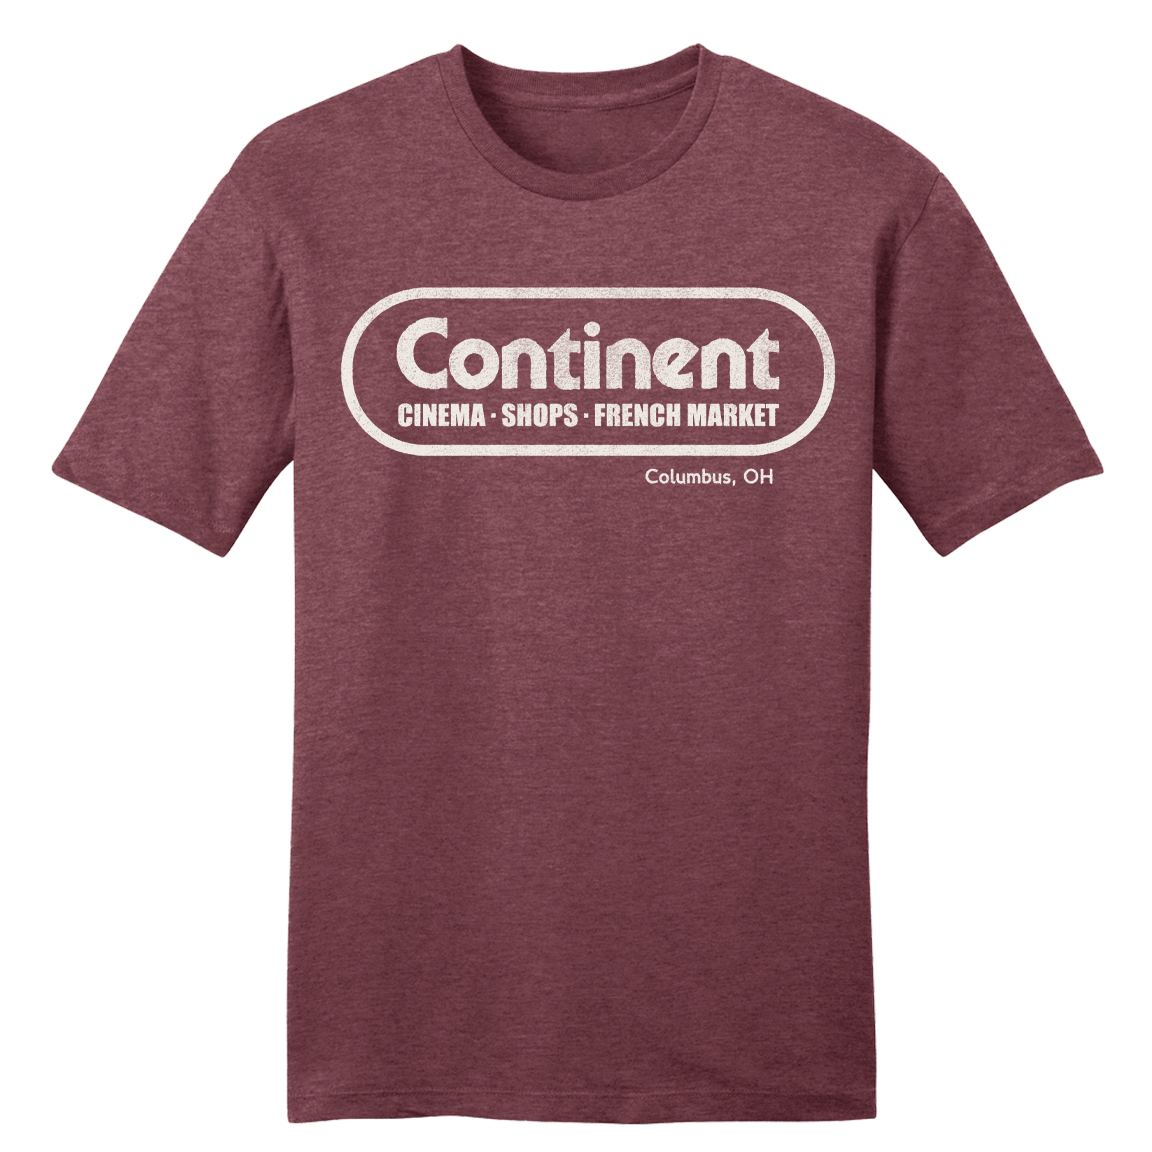 The Continent Tee